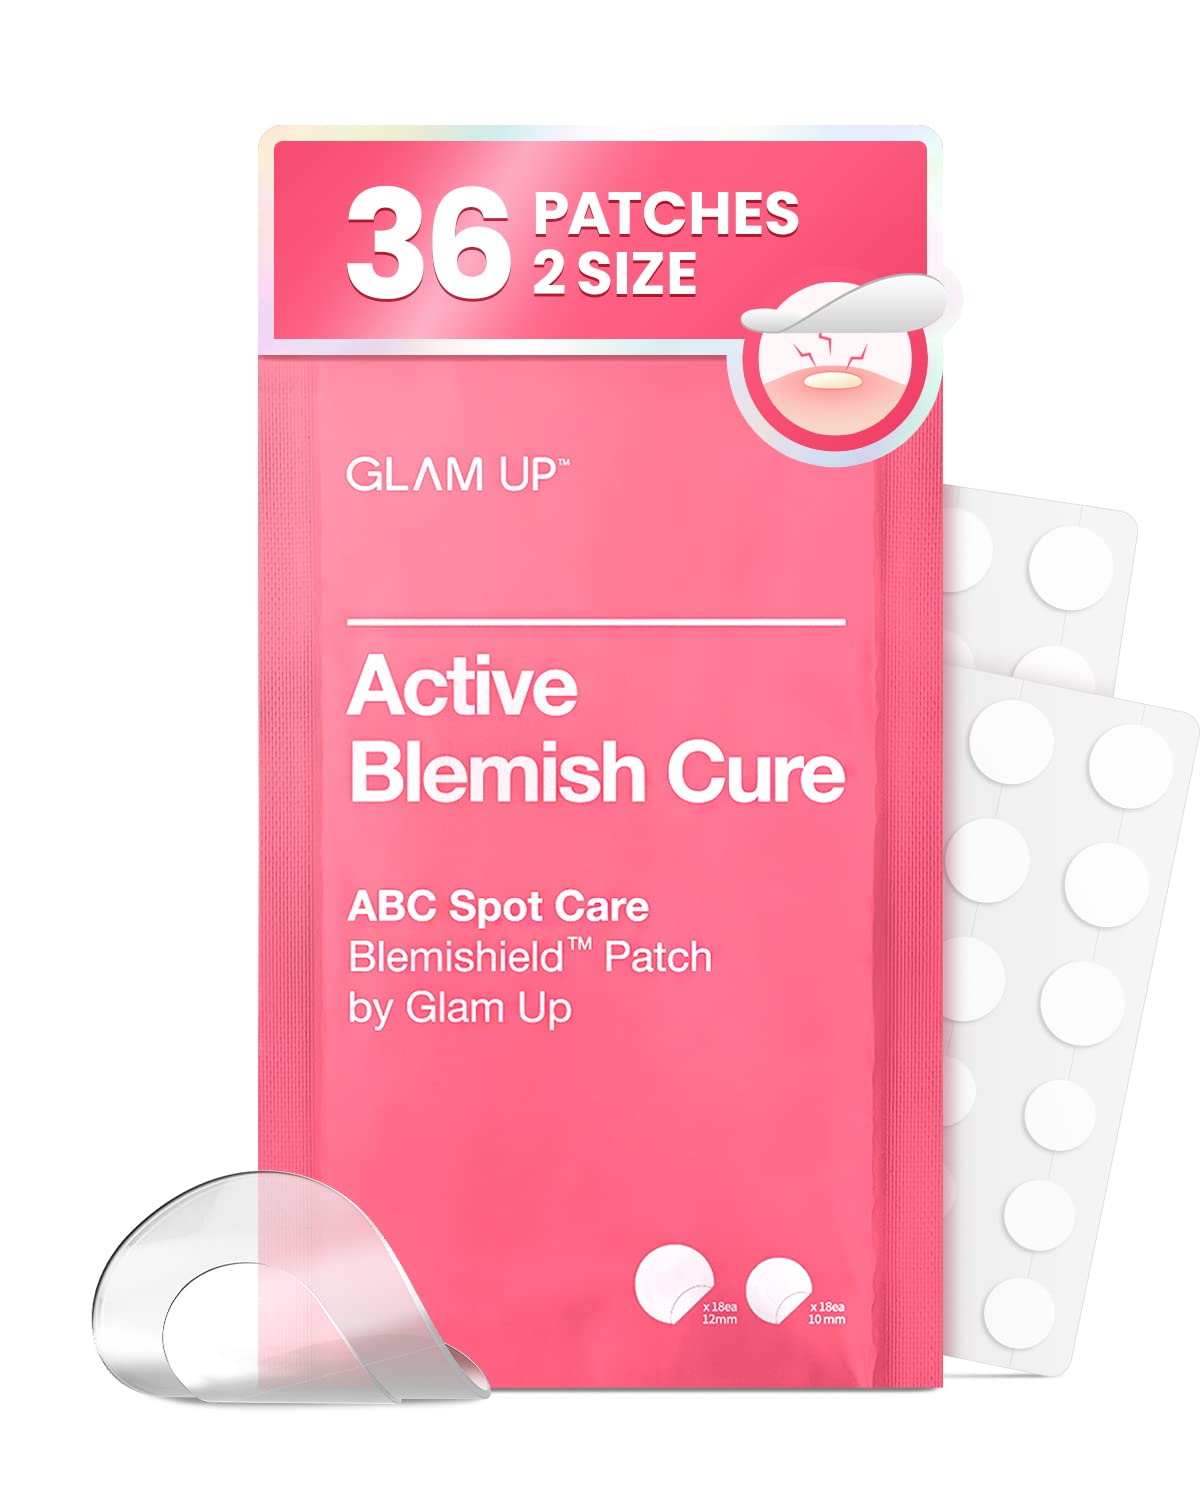 Listen up, folks! If you're like me and have been battling acne and pimples for what feels like an eternity, then you need to get your hands on the GLAM UP Hydrocolloid Acne Pimple Zit Patches ASAP. These little beauties are the superheroes of the skincare world, and boy do they pack a punch!Not only are they vegan-friendly (because let's face it, we all care about the environment), but they also come in two different sizes to cater to all your pimple-popping needs. And let me tell you, they wor